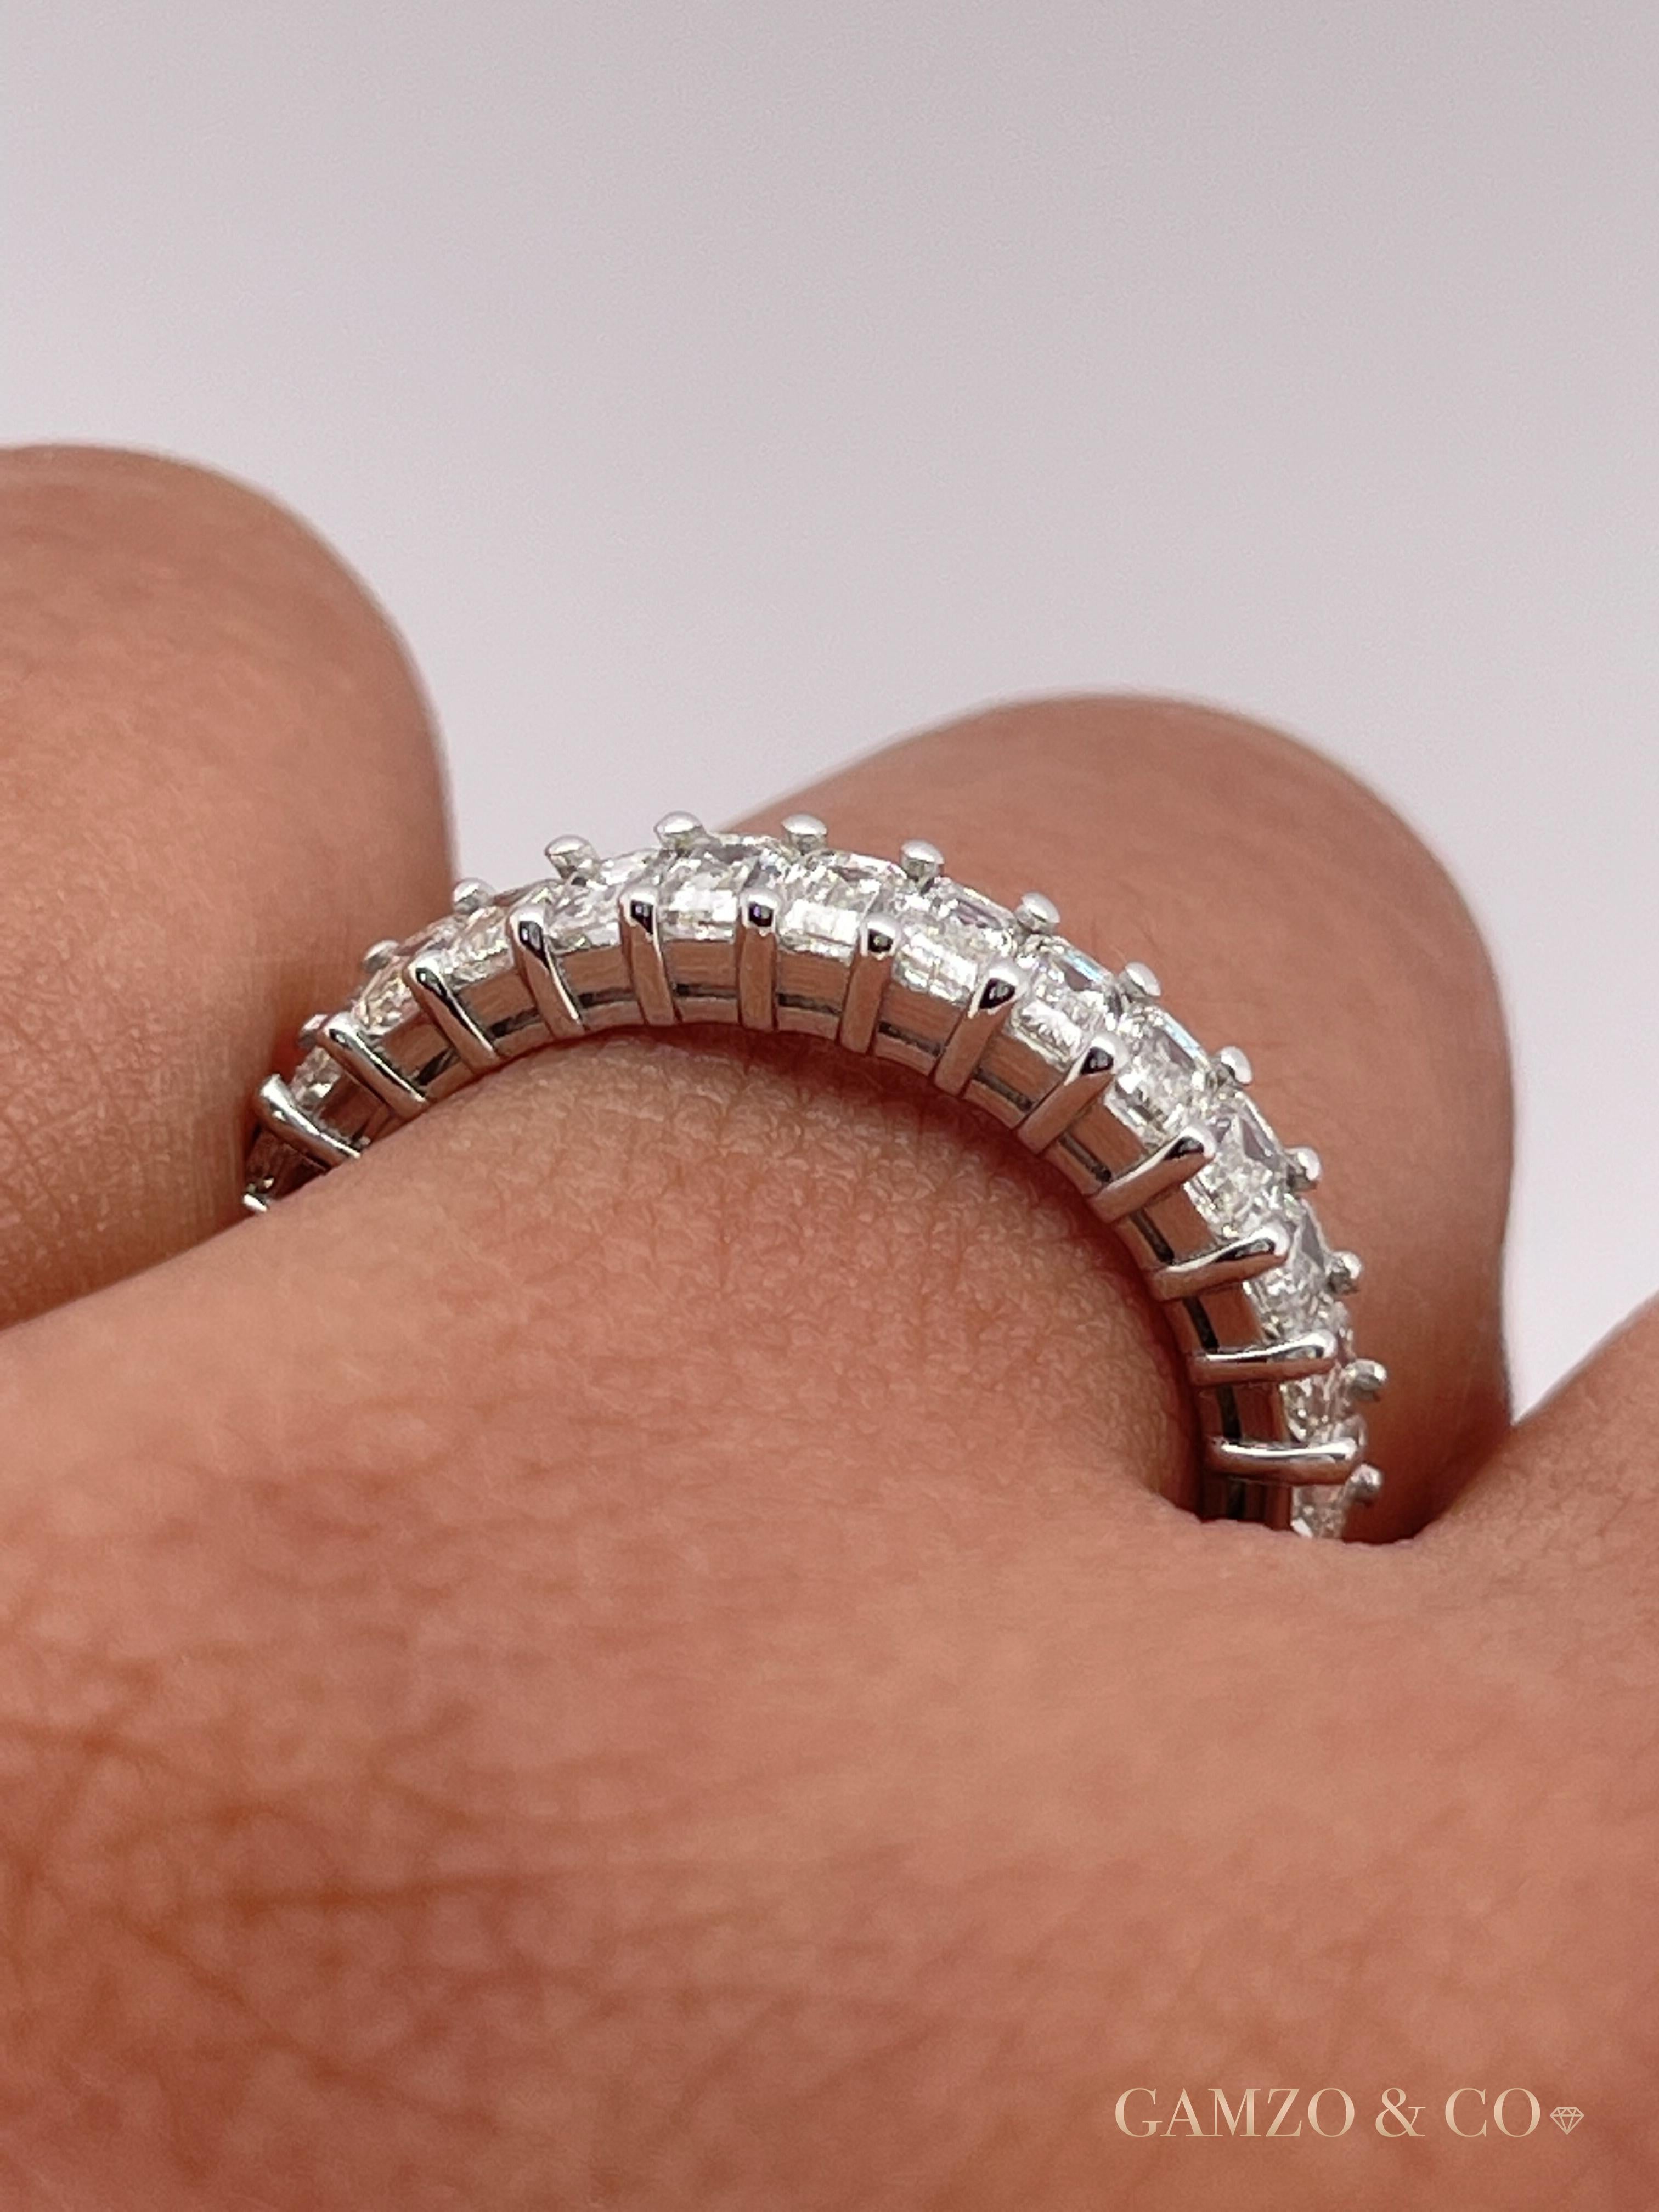 For Sale:  18k White Gold 2.5 Carat Emerald Cut Natural Diamond Eternity Ring 4